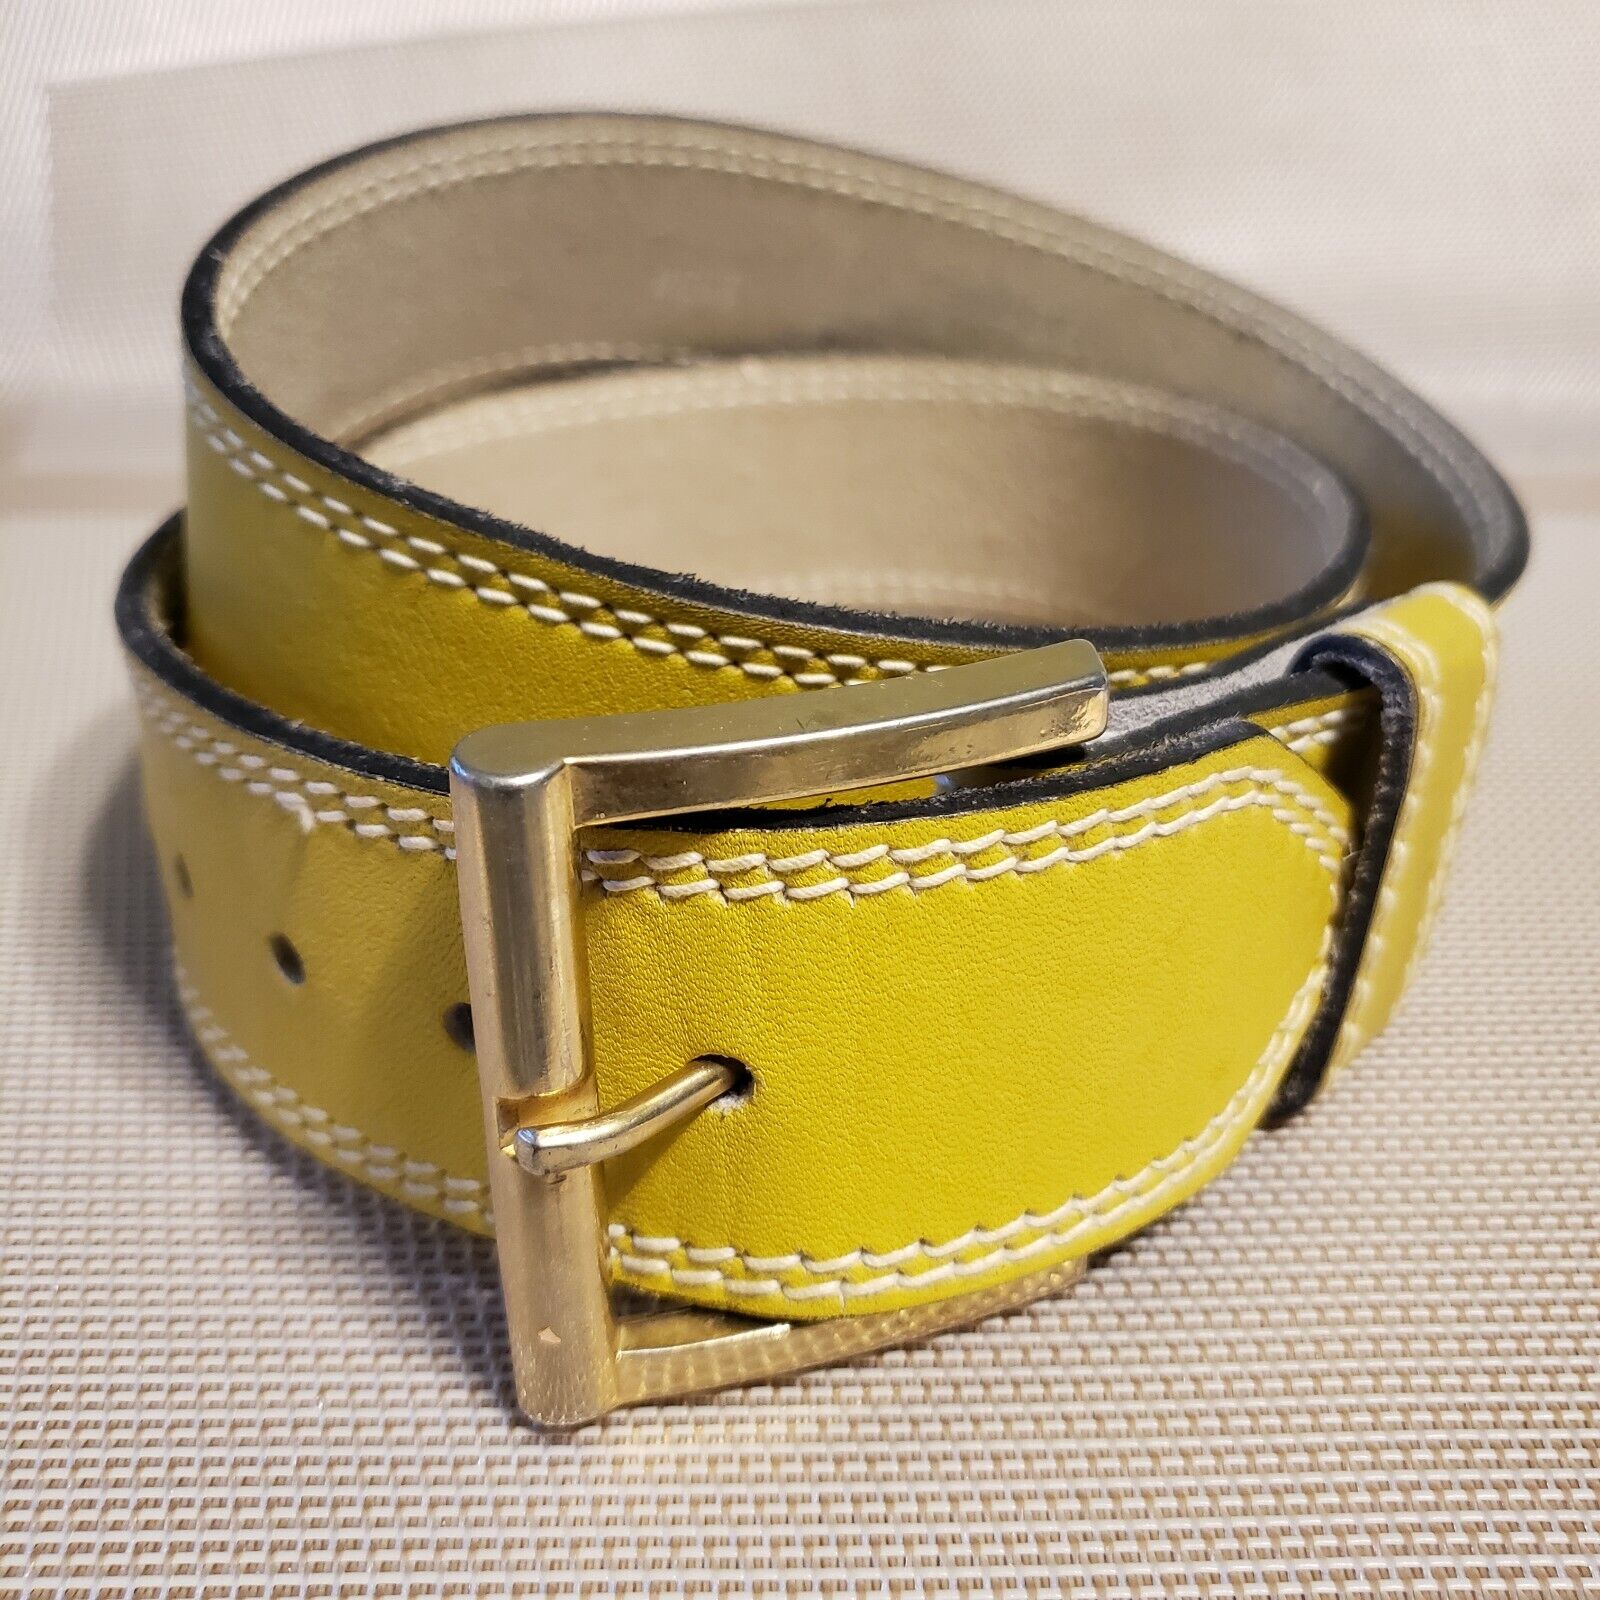 Yellow/Sand Color Leather Belt - image 1